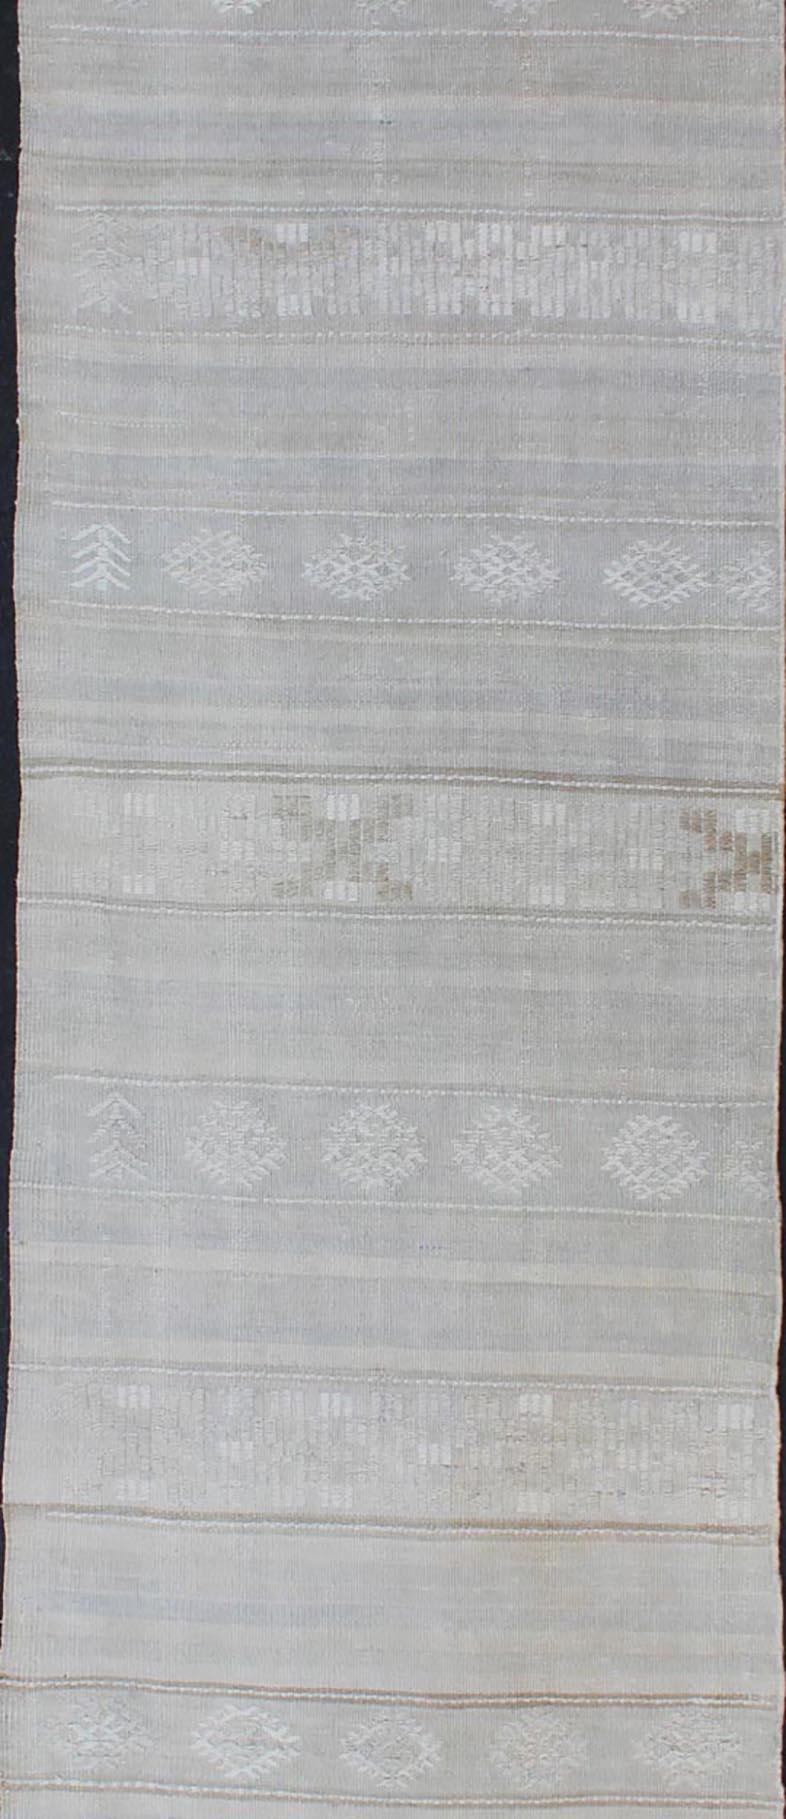 Vintage Turkish Kilim Runner with Stripes in Light Grey and Muted Tones In Good Condition For Sale In Atlanta, GA